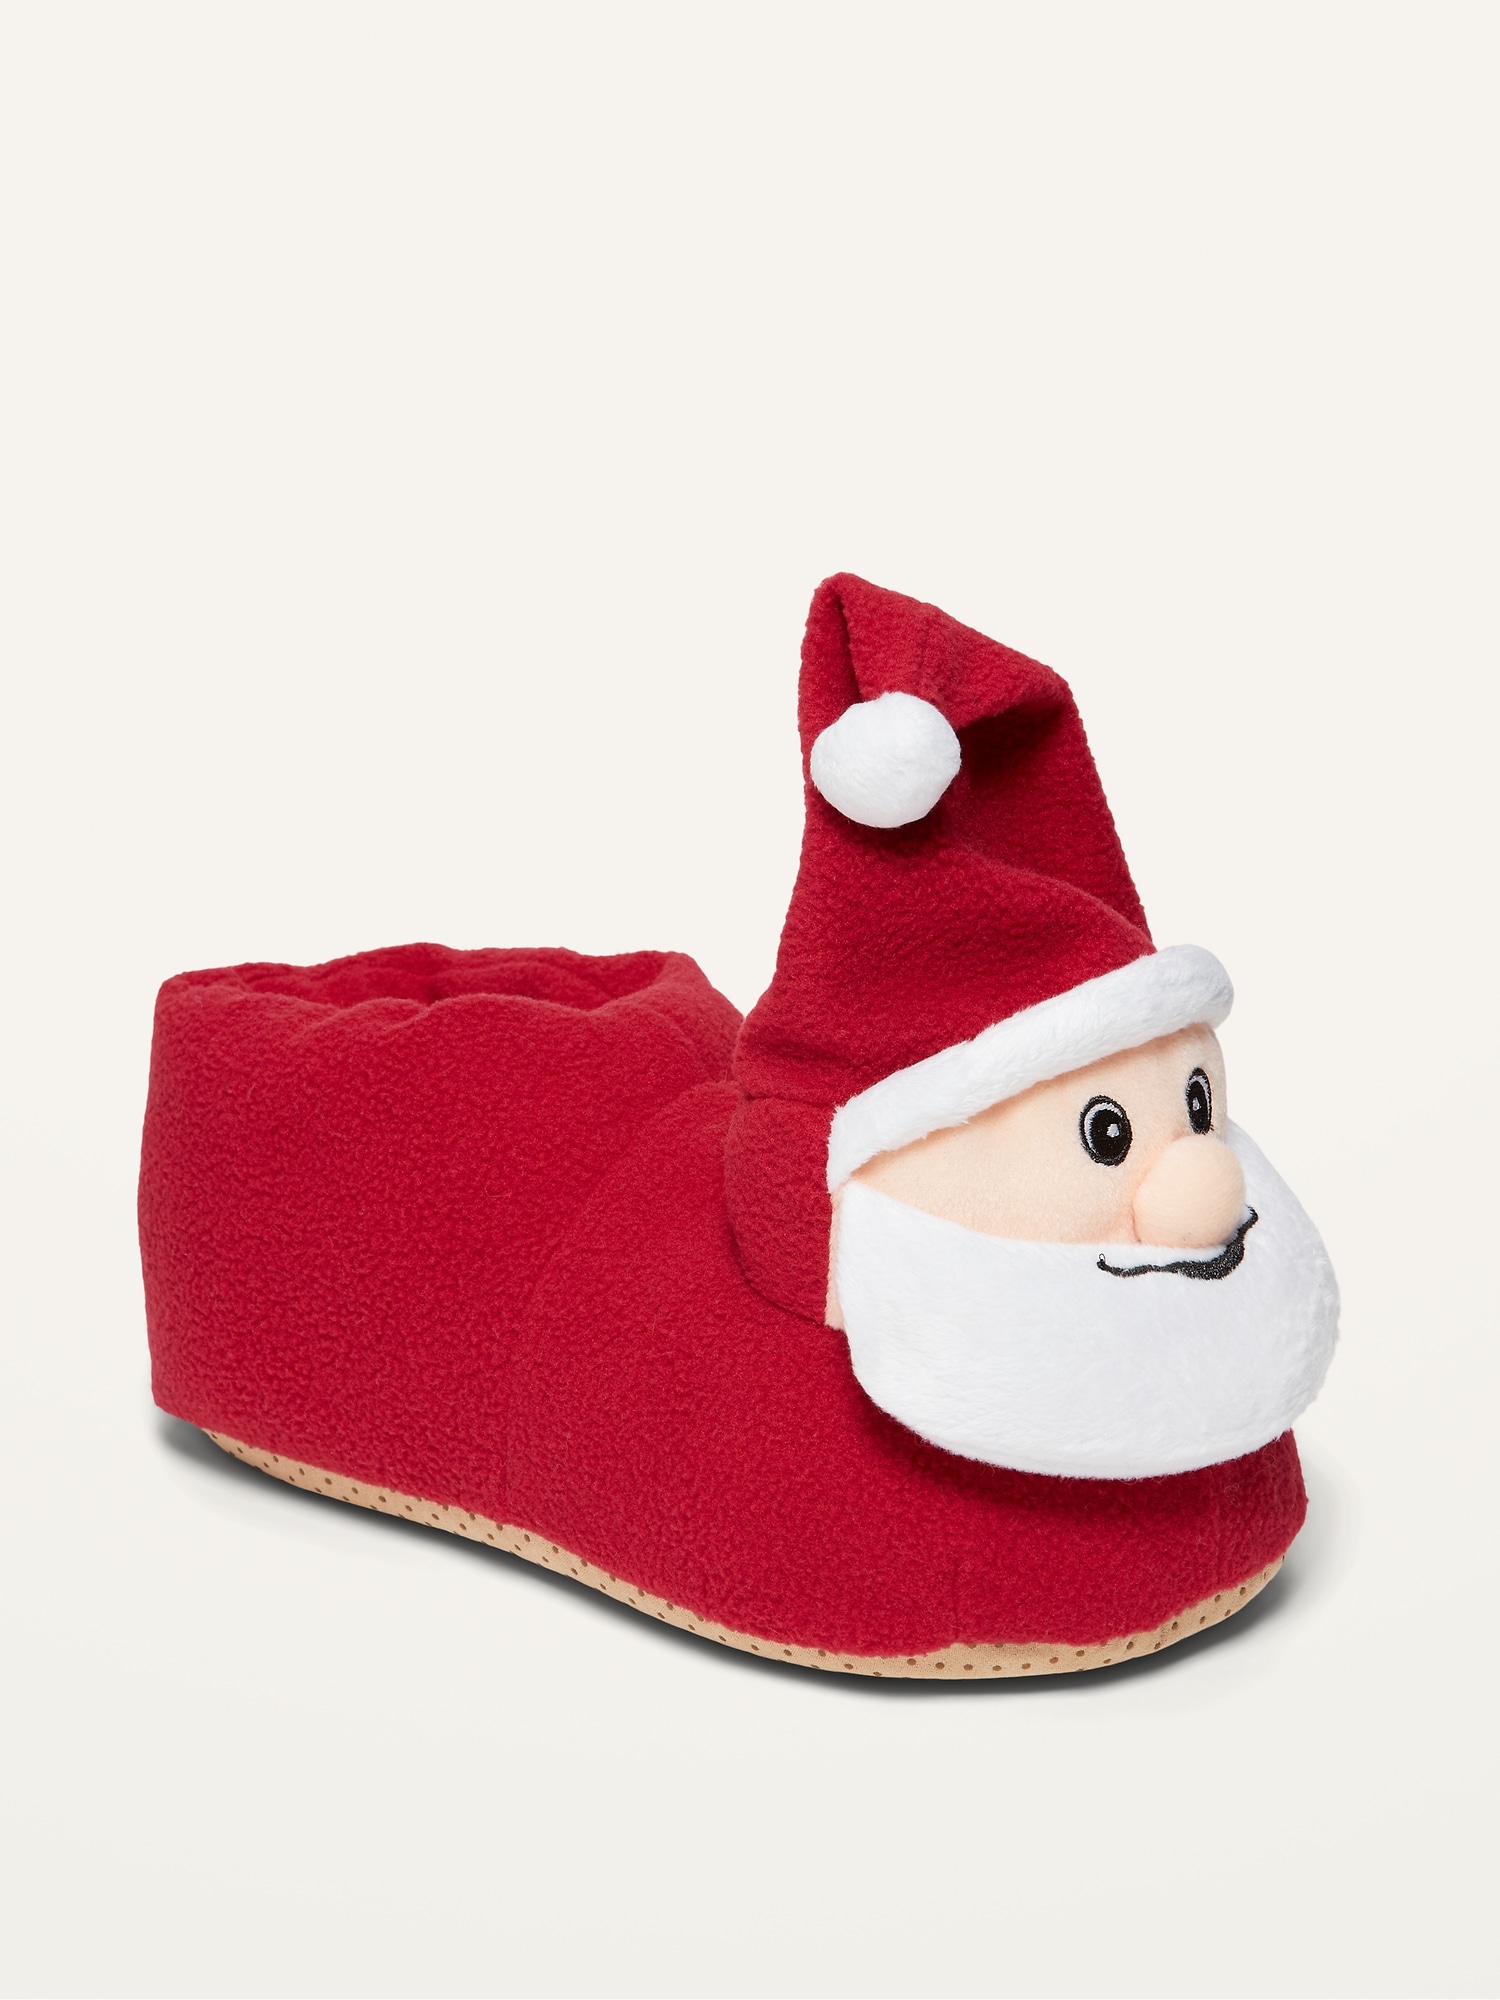 Cozy Christmas Slippers for Men | Old Navy